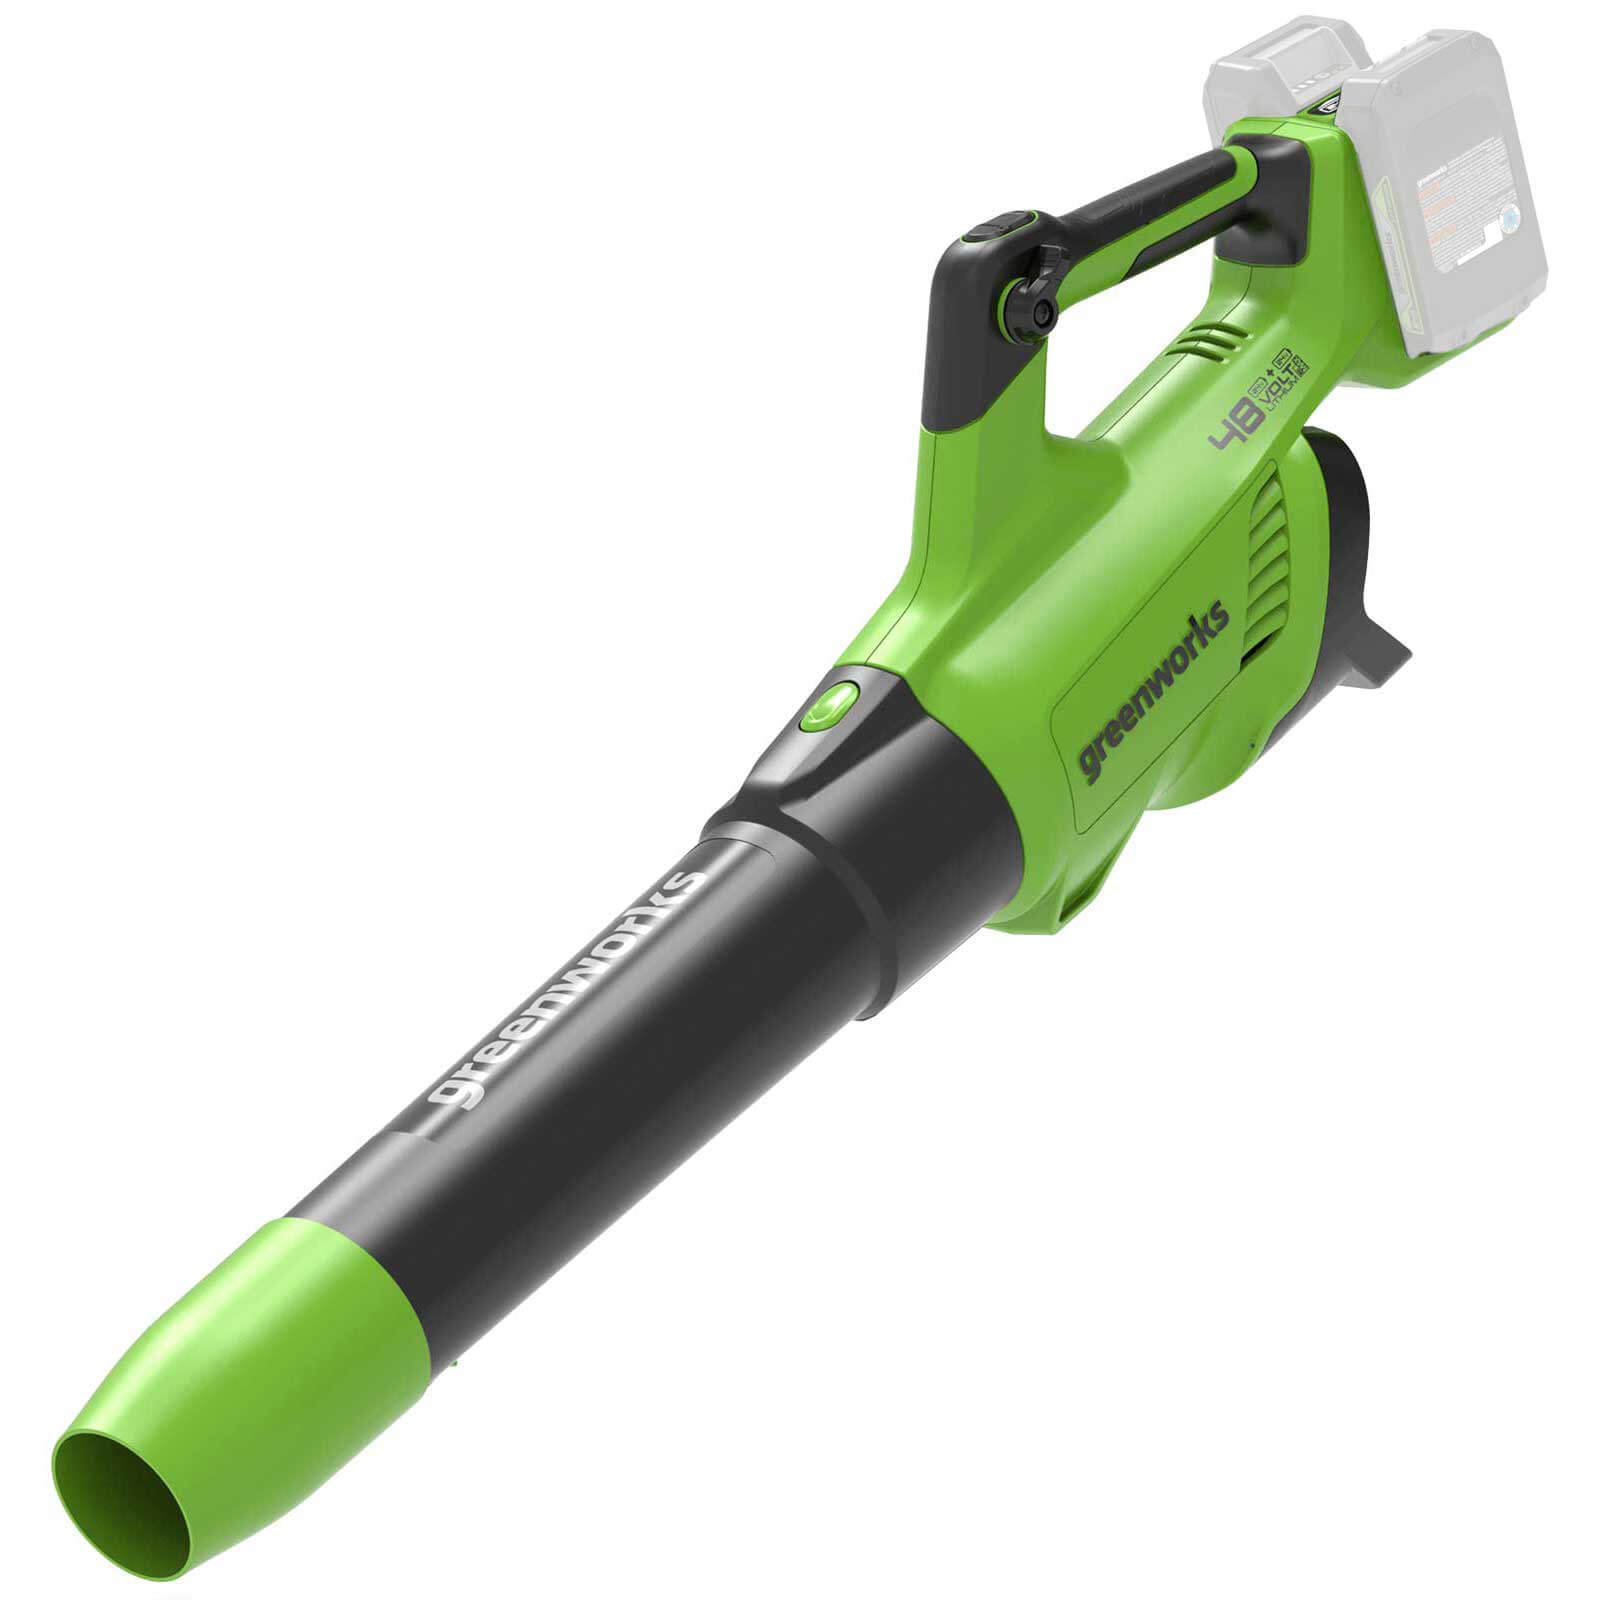 Greenworks G24X2AB 48v Cordless Axial Leaf Blower (Uses 2 x 24v) No Batteries No Charger